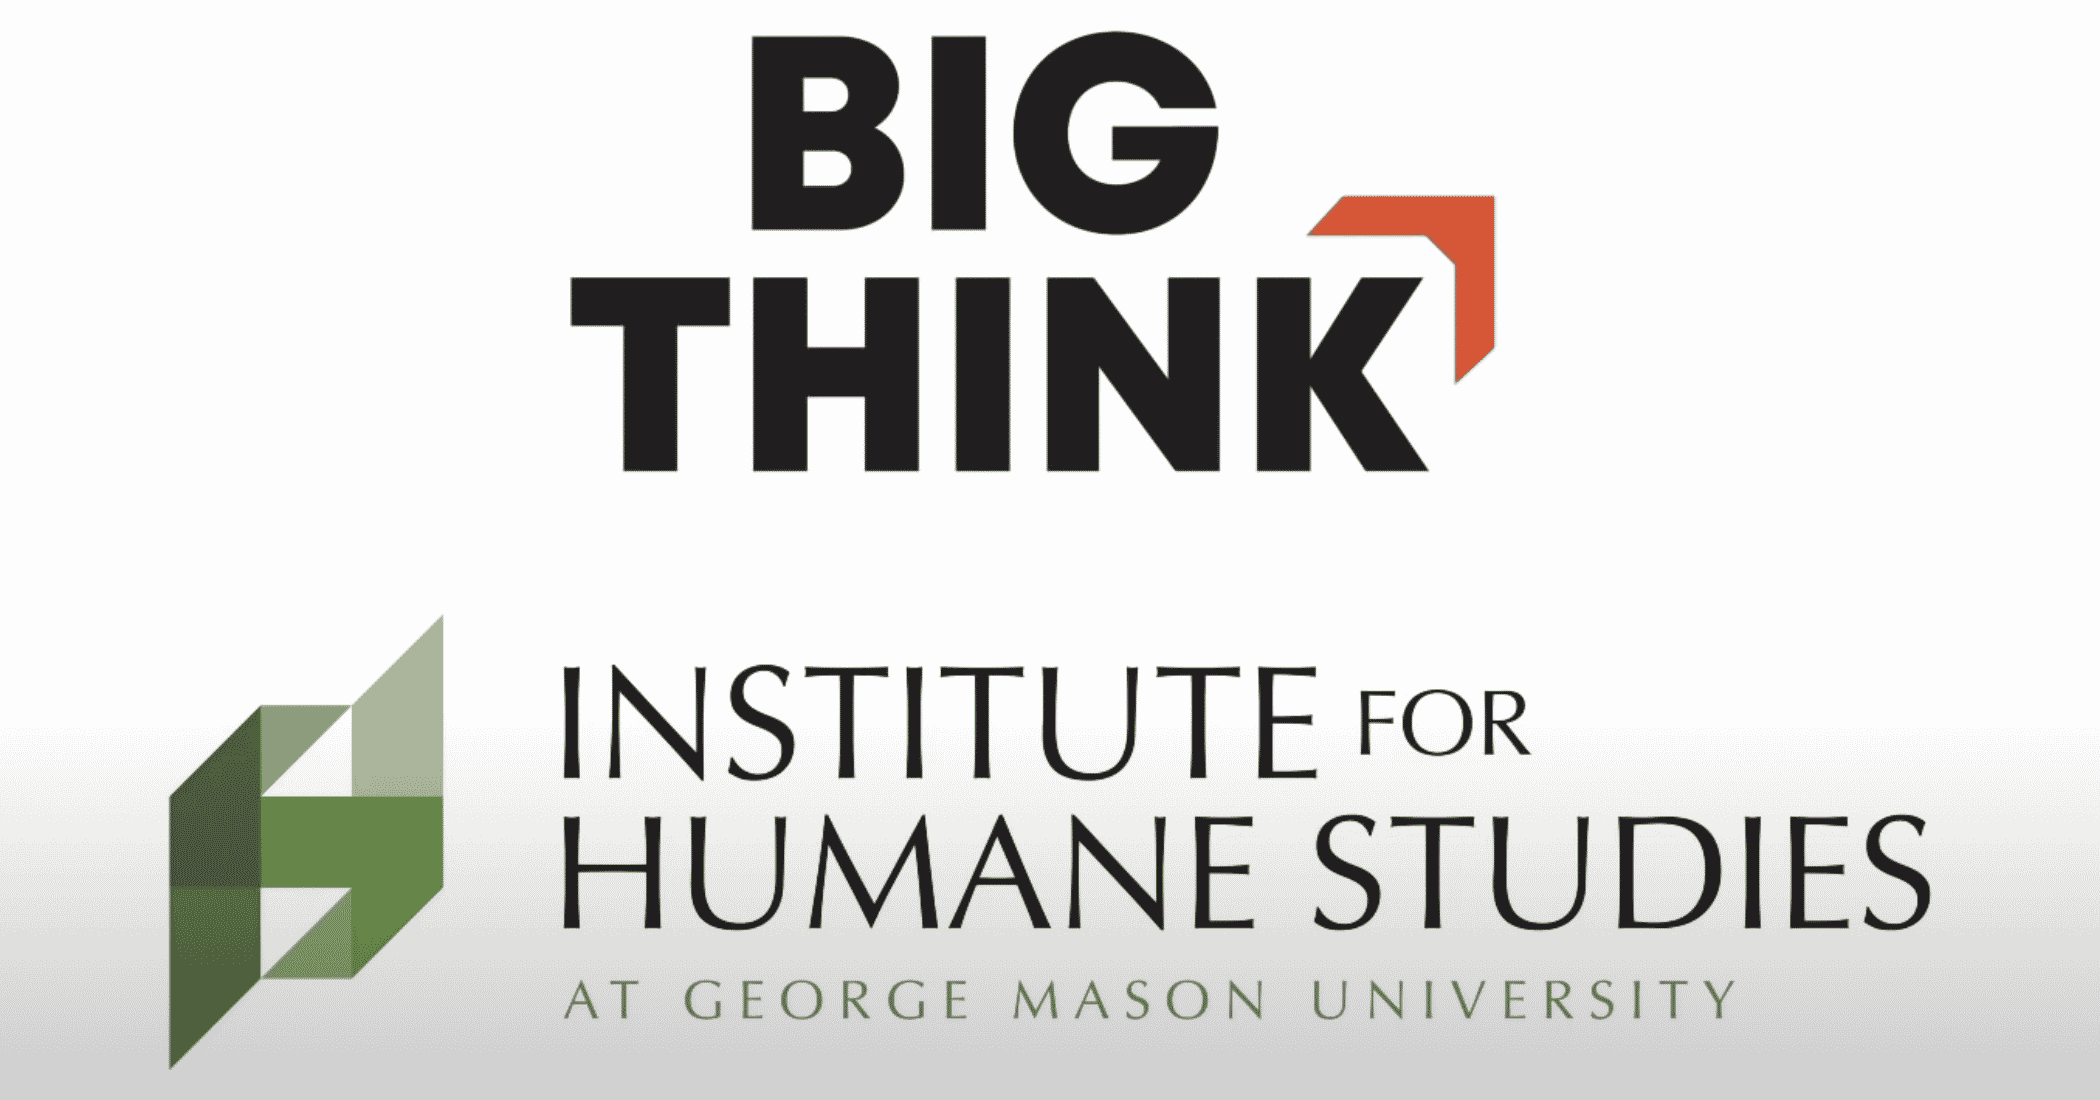 big think and institute for humane studies combined logo